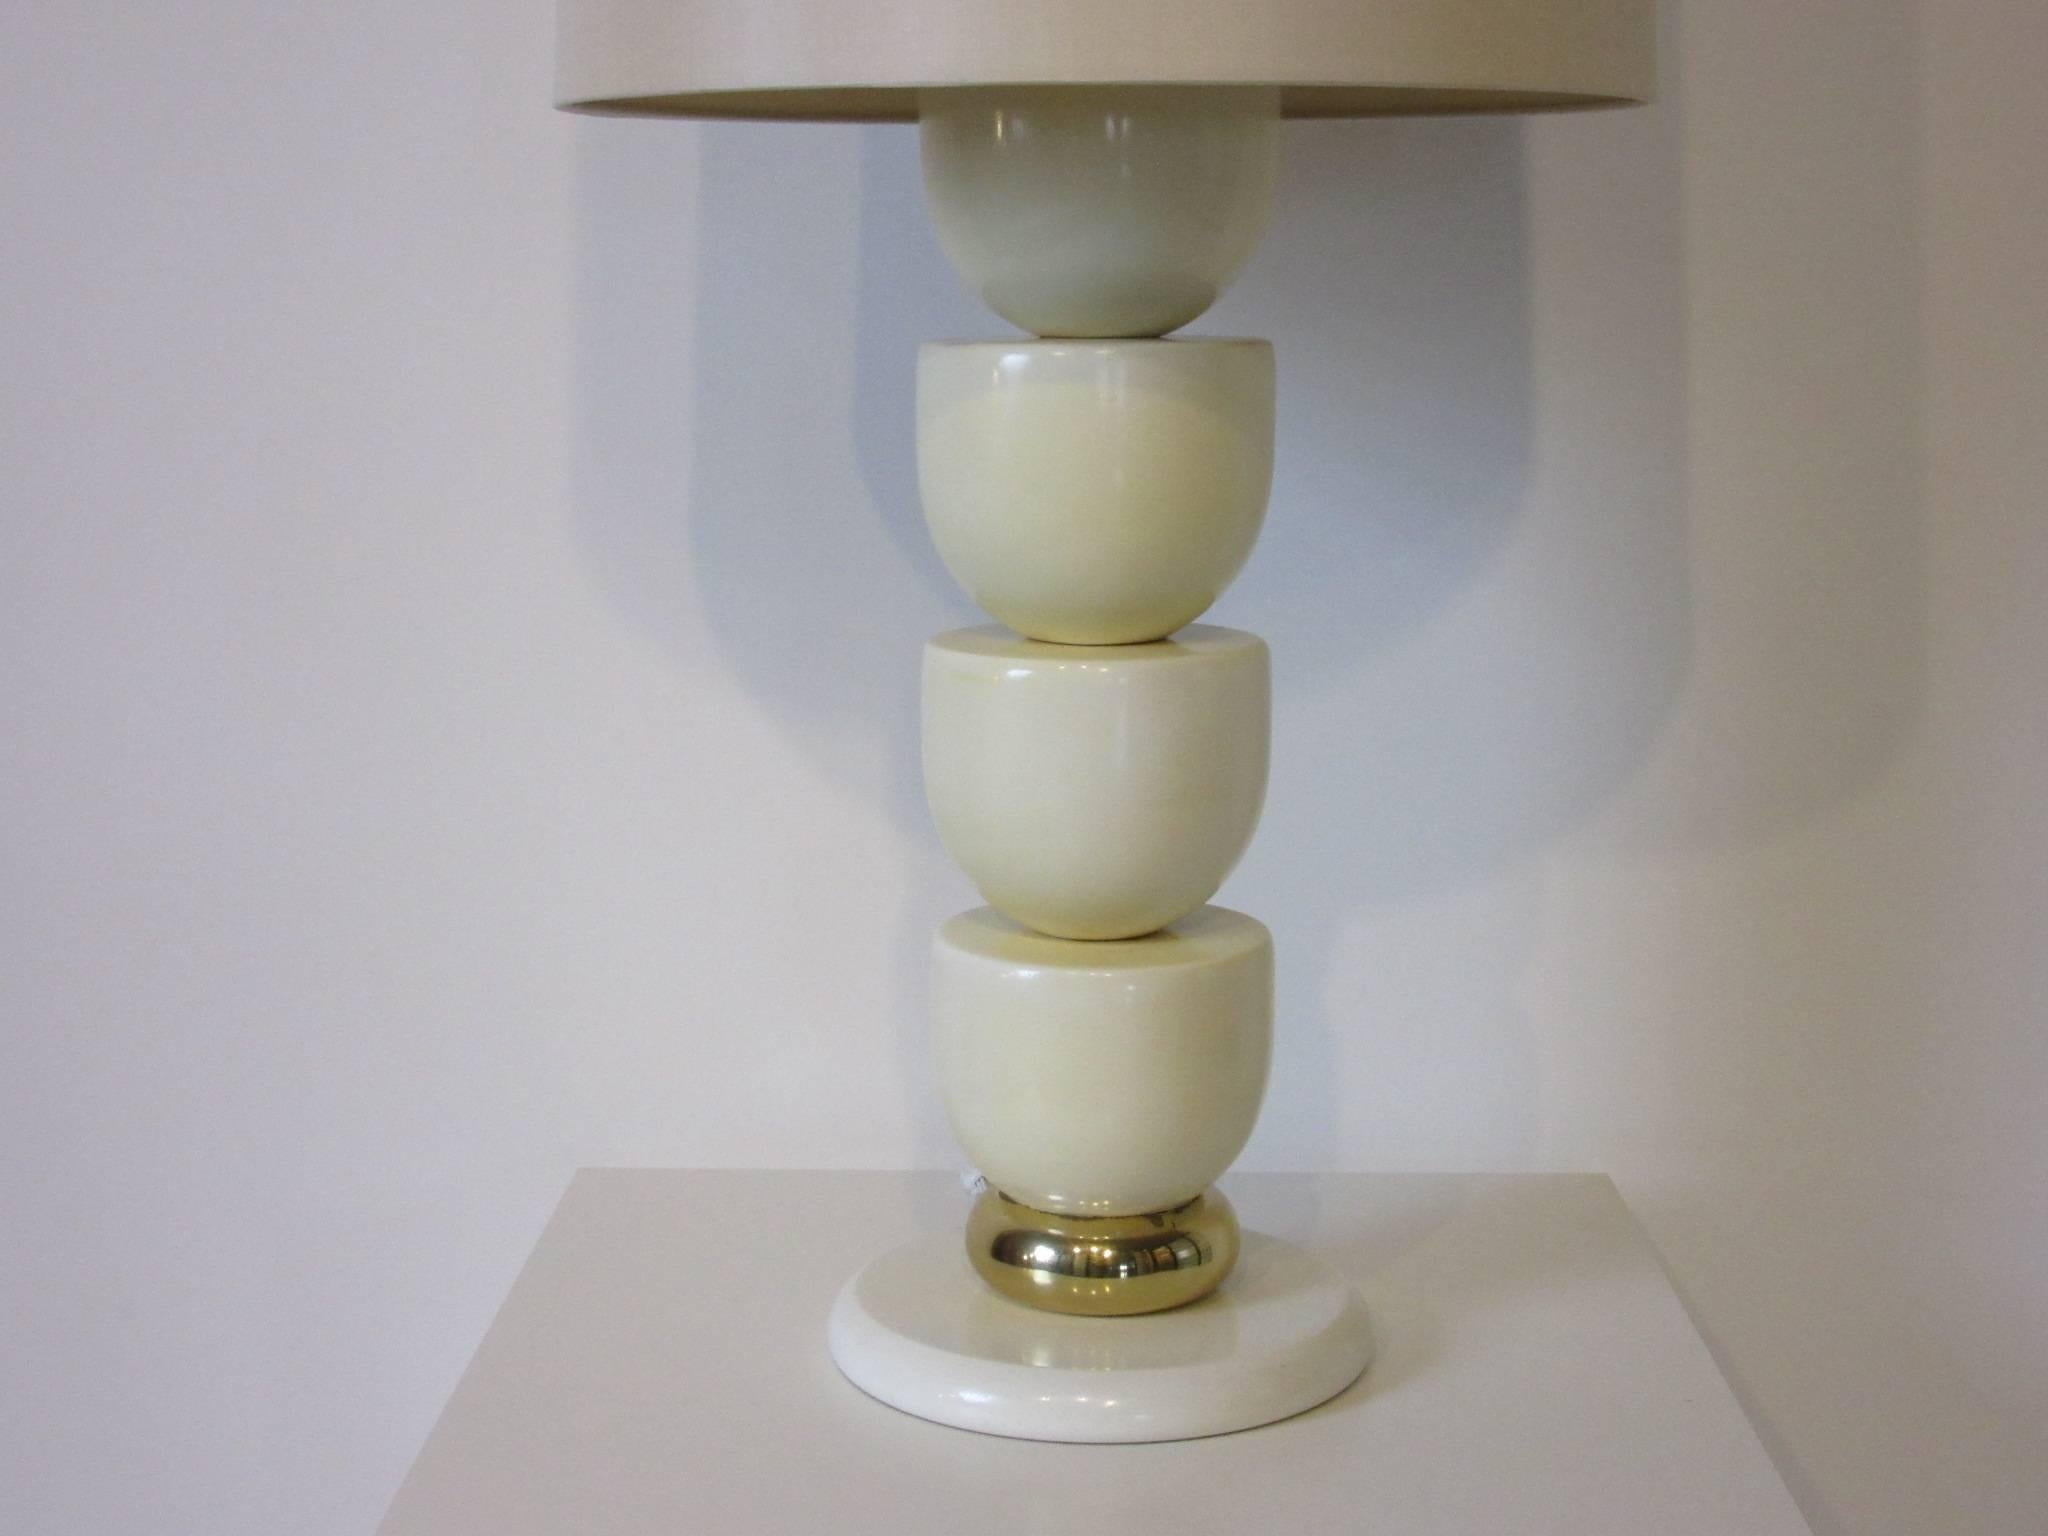 A very well crafted off-white colored lacquered solid wood sculptural table lamp with matching original finial and brass accent, topped with a parchment sand toned linen shade. A heavy and well constructed design in the manner of Steve Chase and